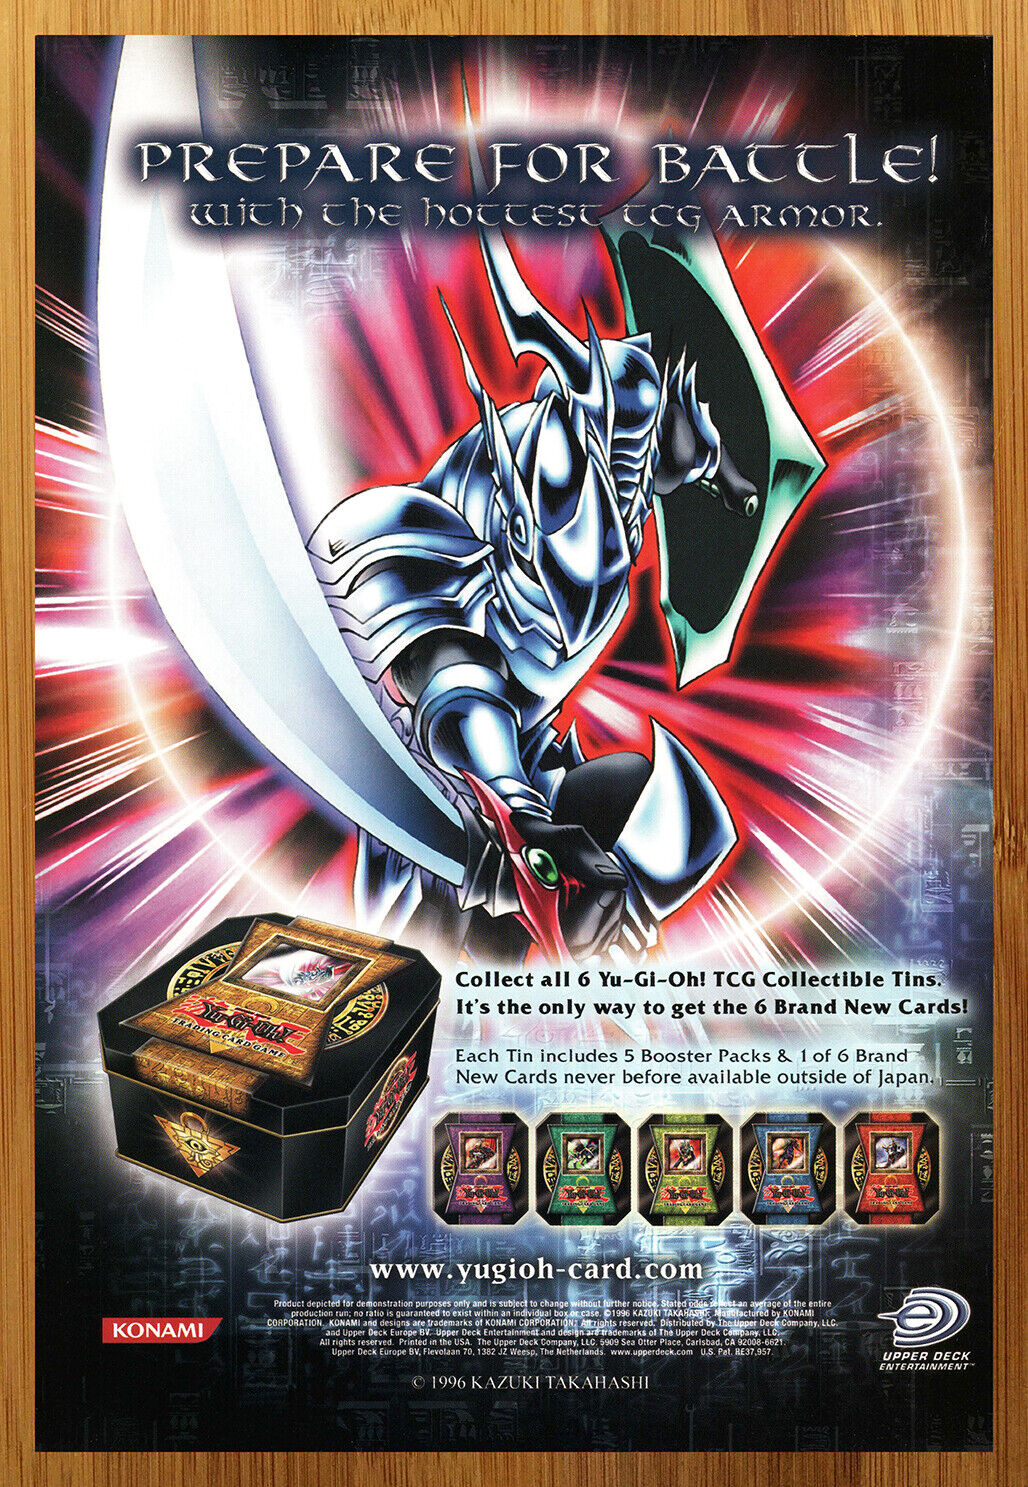 2004 Yu-Gi-Oh TCG Collectible Tins Booster Packs Print Ad/Poster Official Art